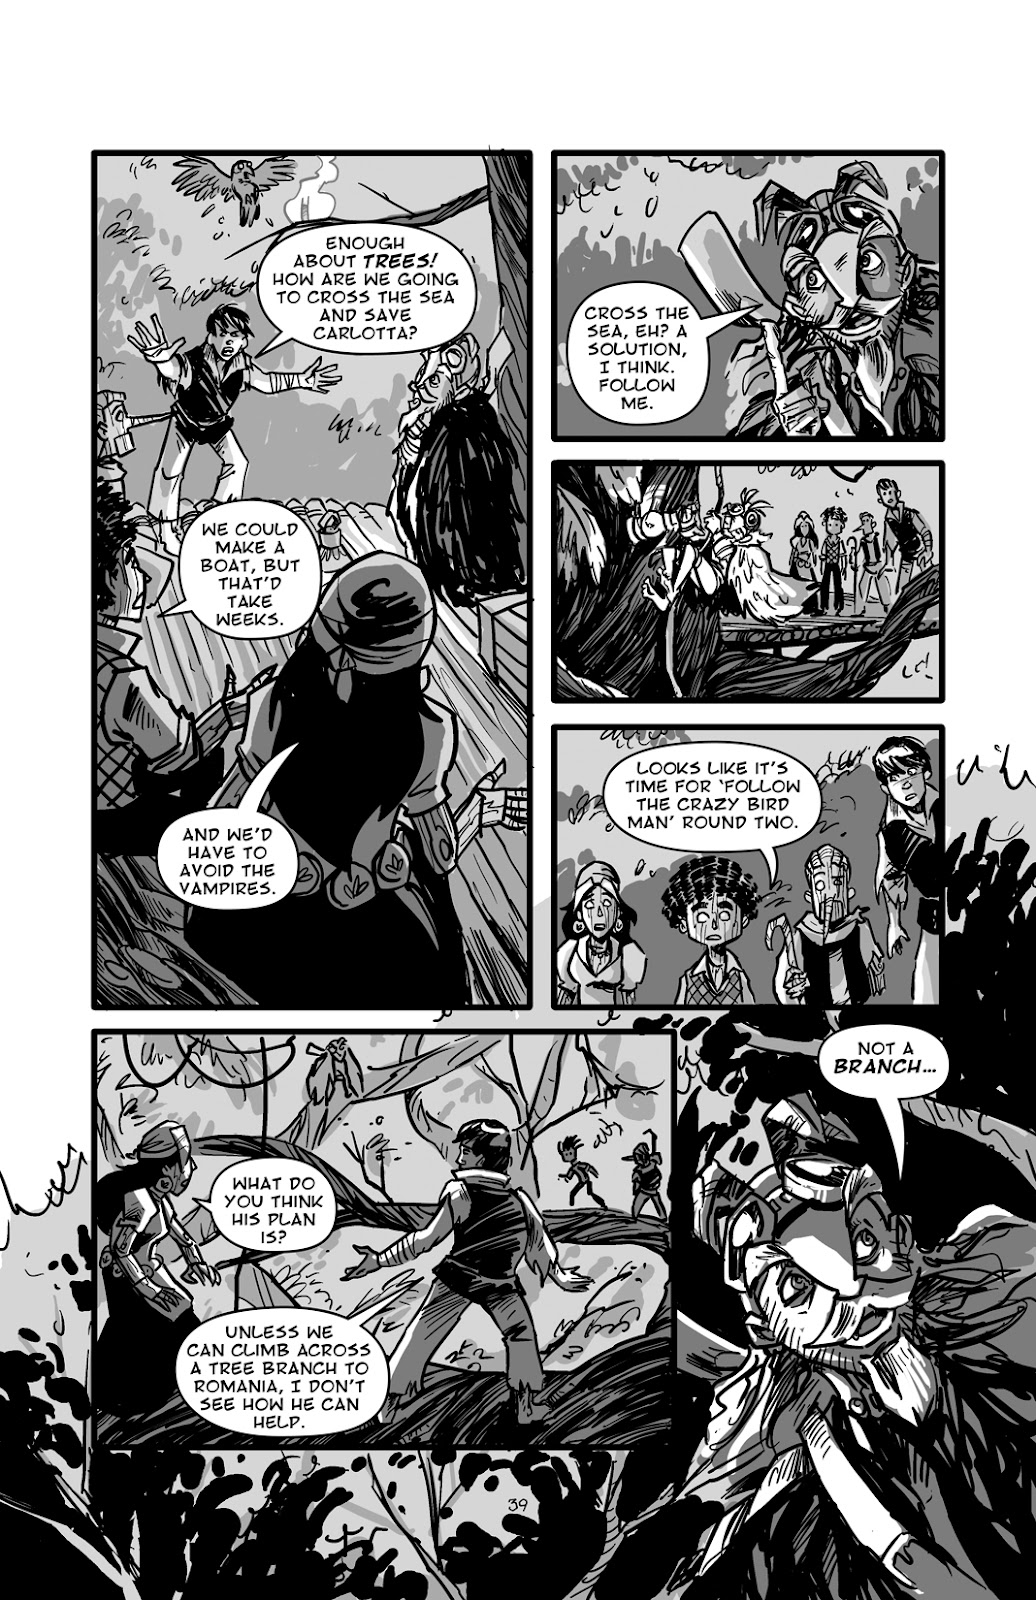 Pinocchio: Vampire Slayer - Of Wood and Blood issue 2 - Page 13